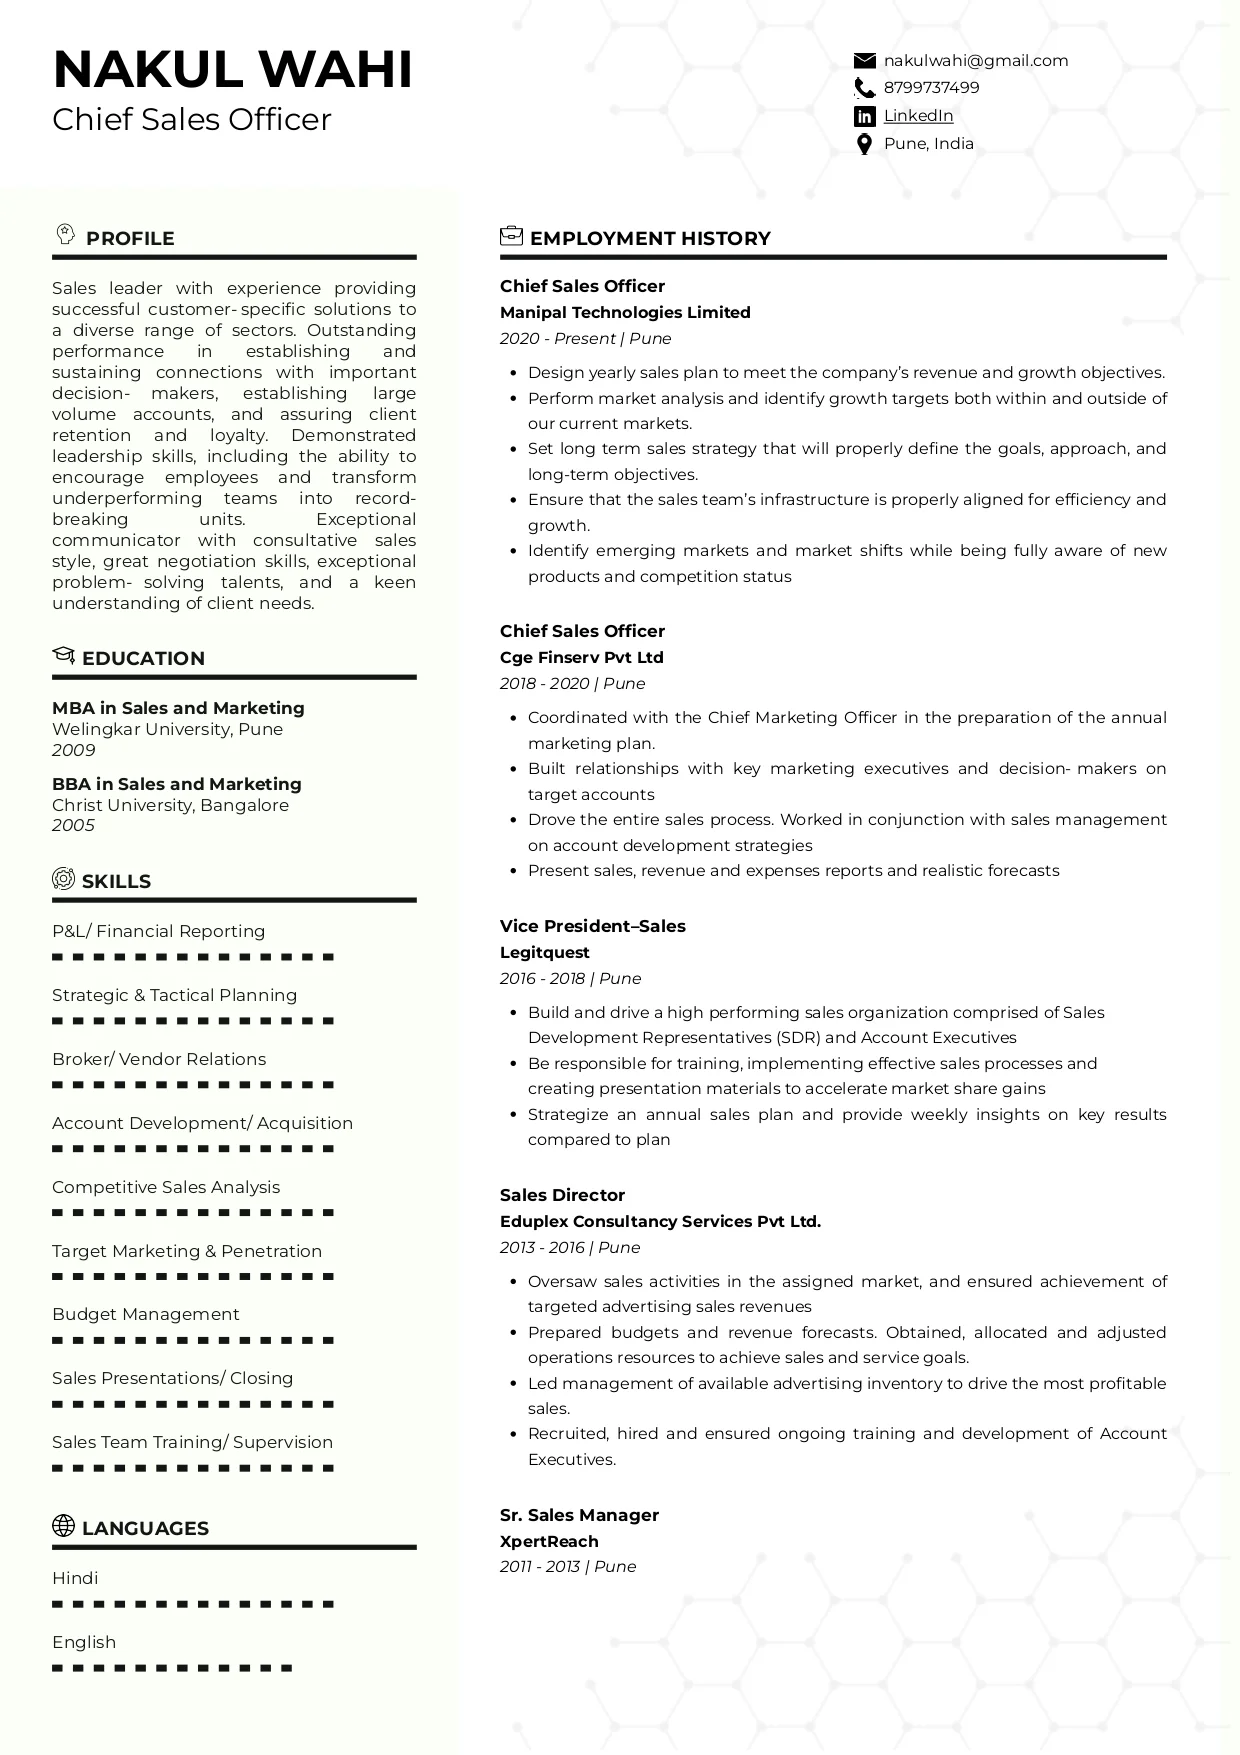 Sample Resume of Chief Sales Officer | Free Resume Templates & Samples on Resumod.co